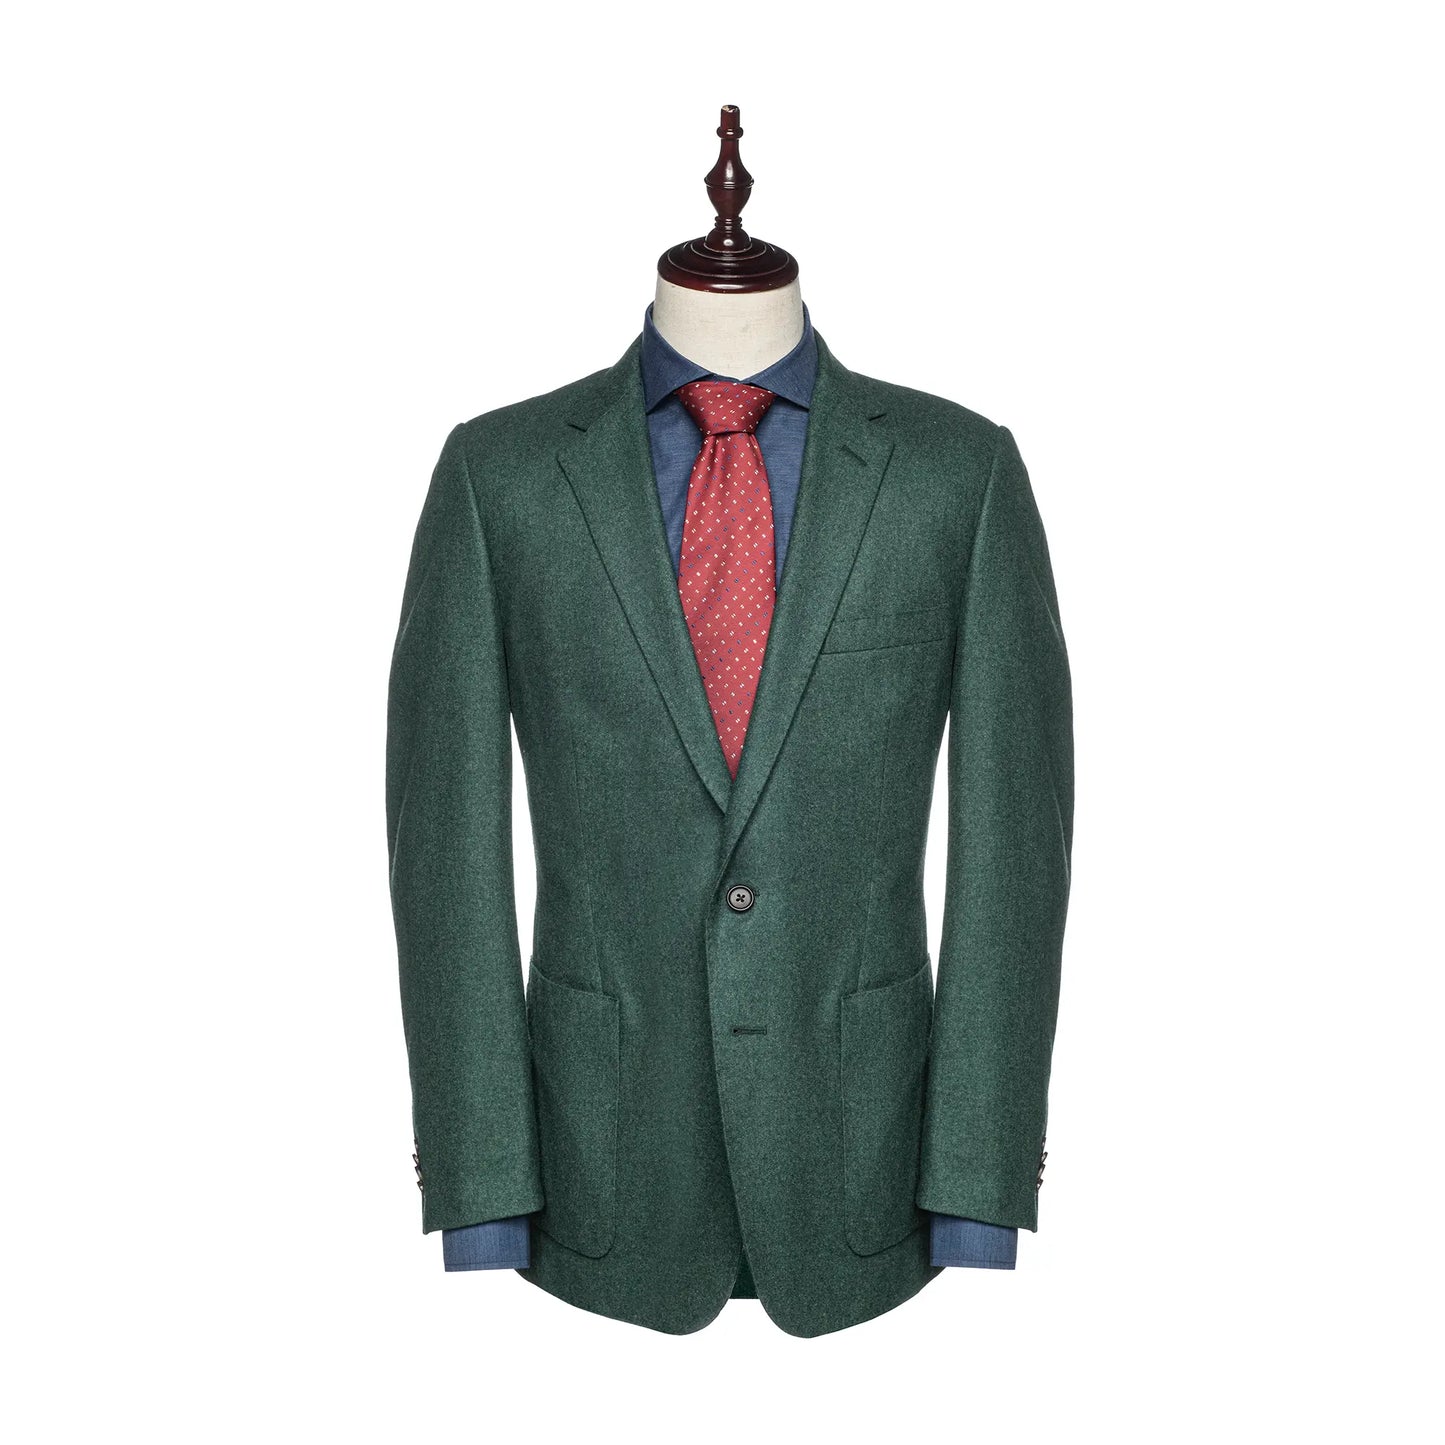 Forest Fringe Wool Jacket - Larimars Clothing Men's Formal and casual wear shirts